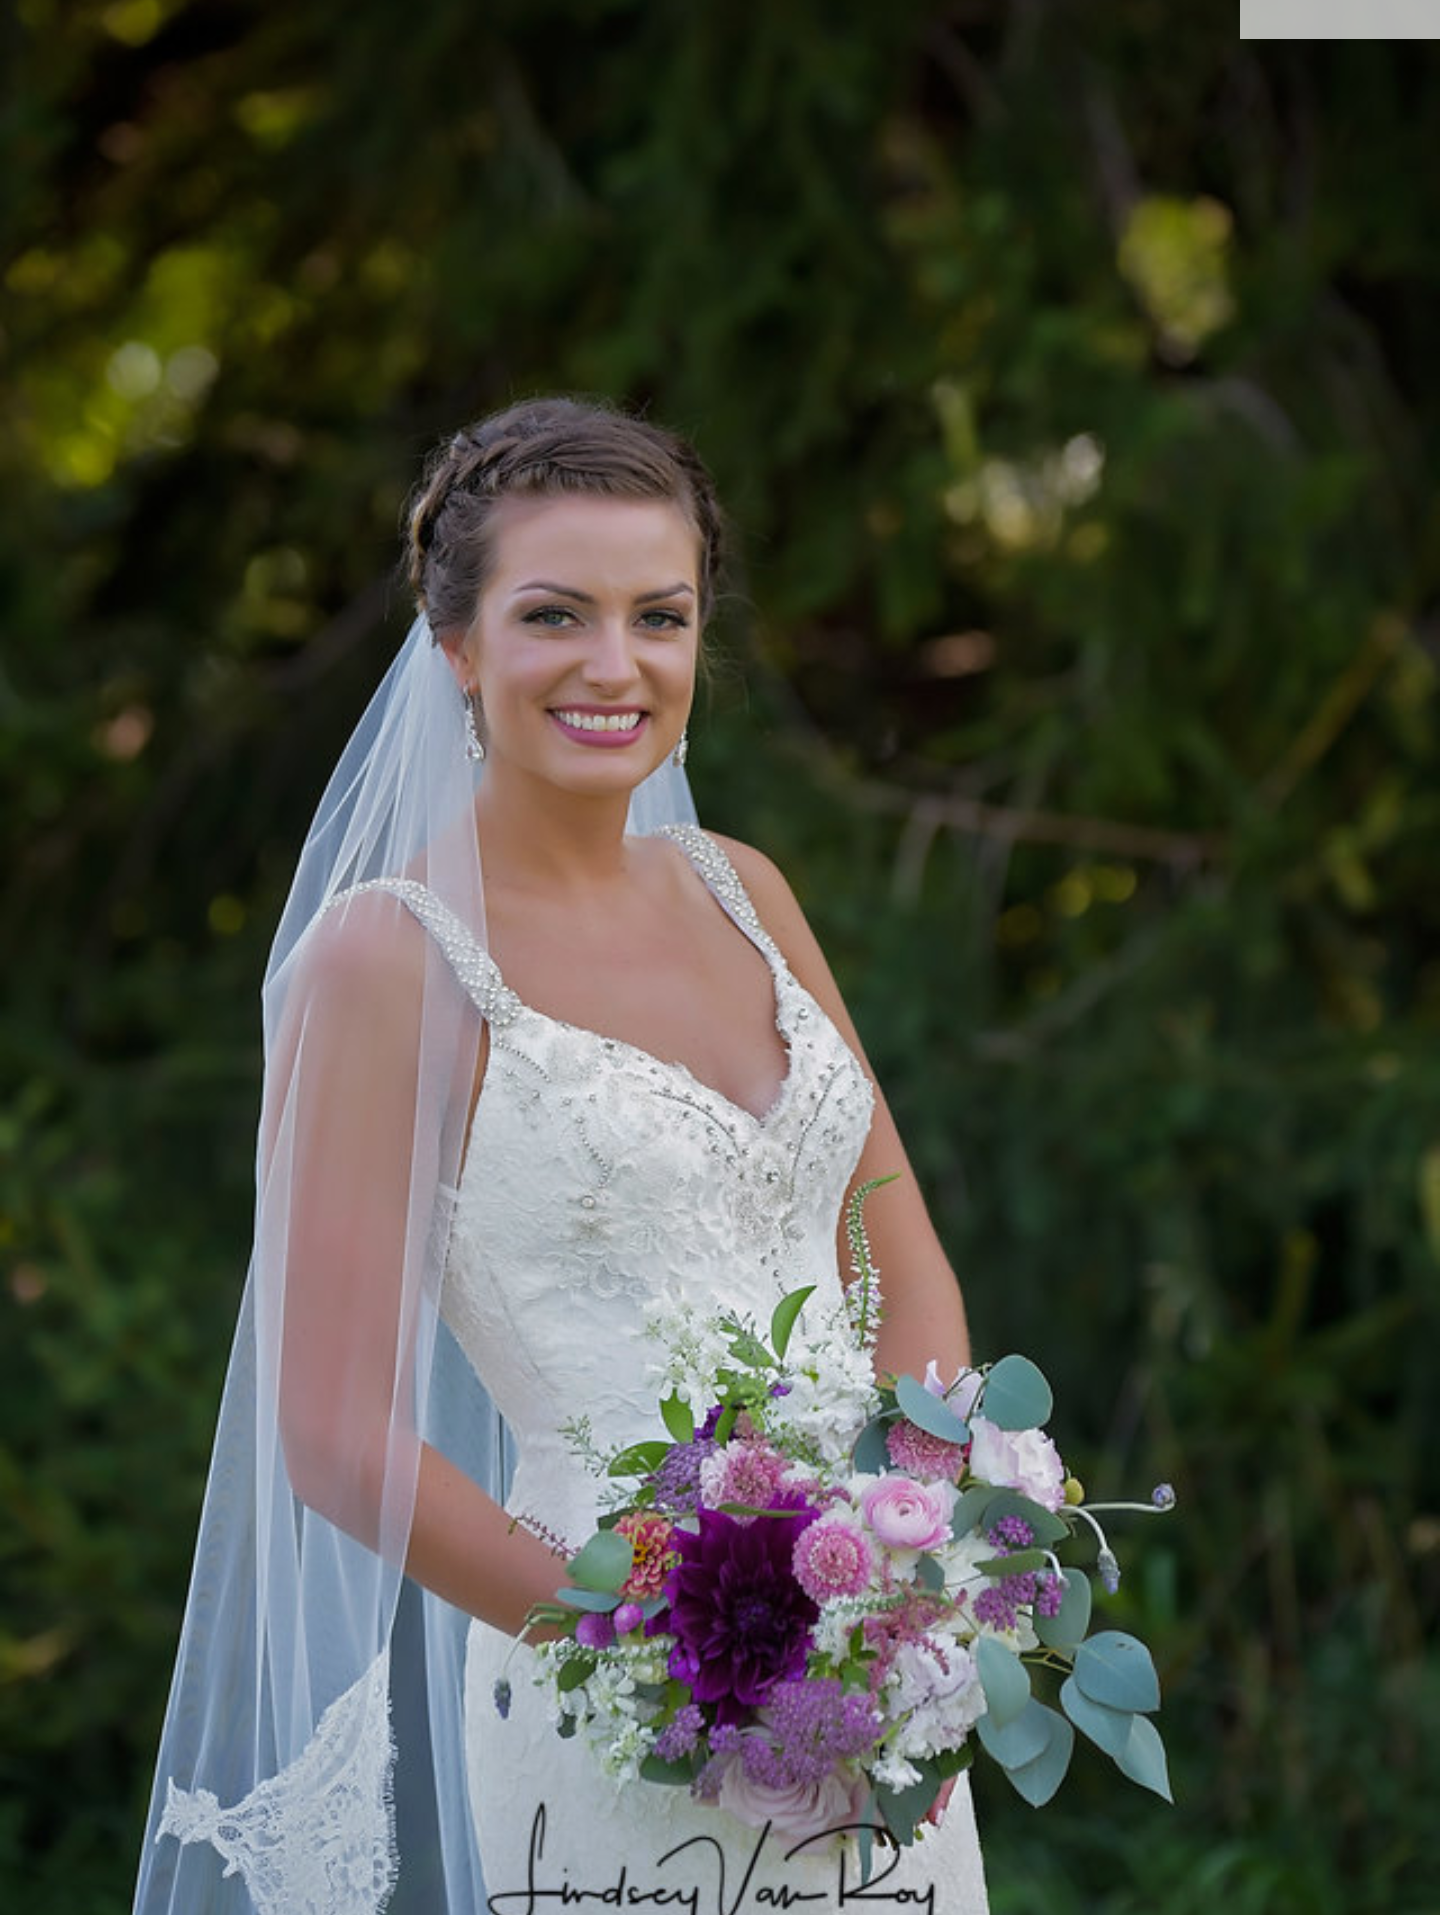 A gorgeous bride with flawless airbrushed makeup